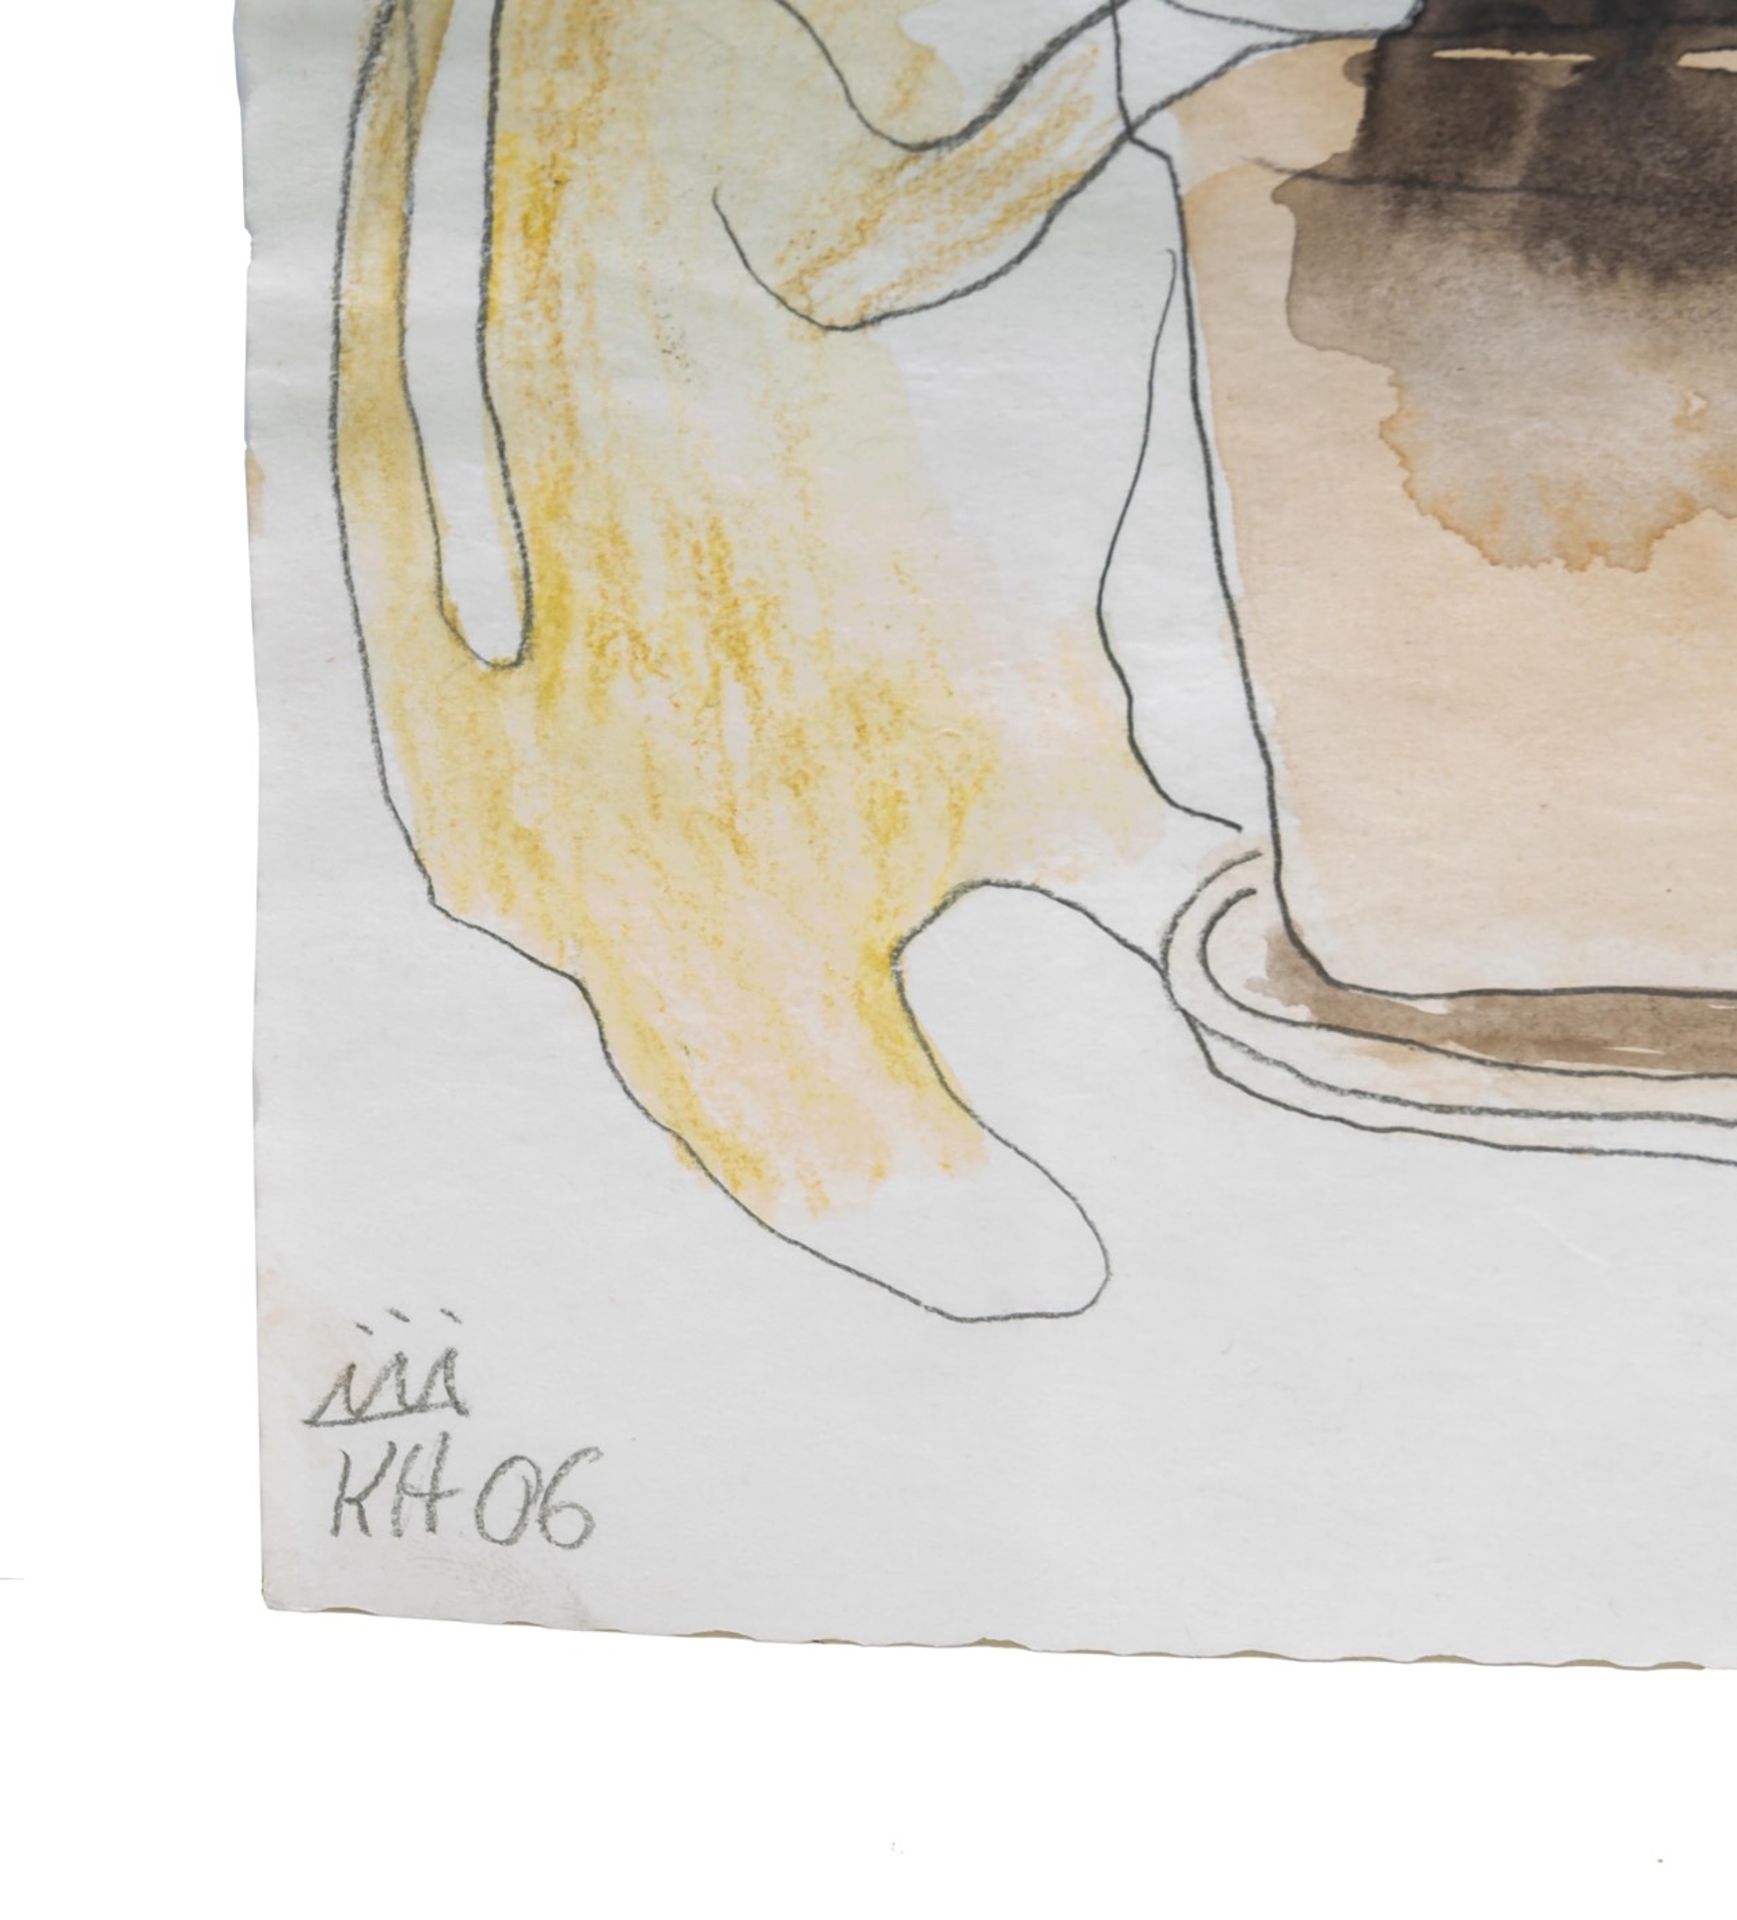 Kati Heck (1979), family portrait, 2006, watercolour and pencil on paper 21 x 30 cm. (8.2 x 11.8 in. - Image 2 of 2